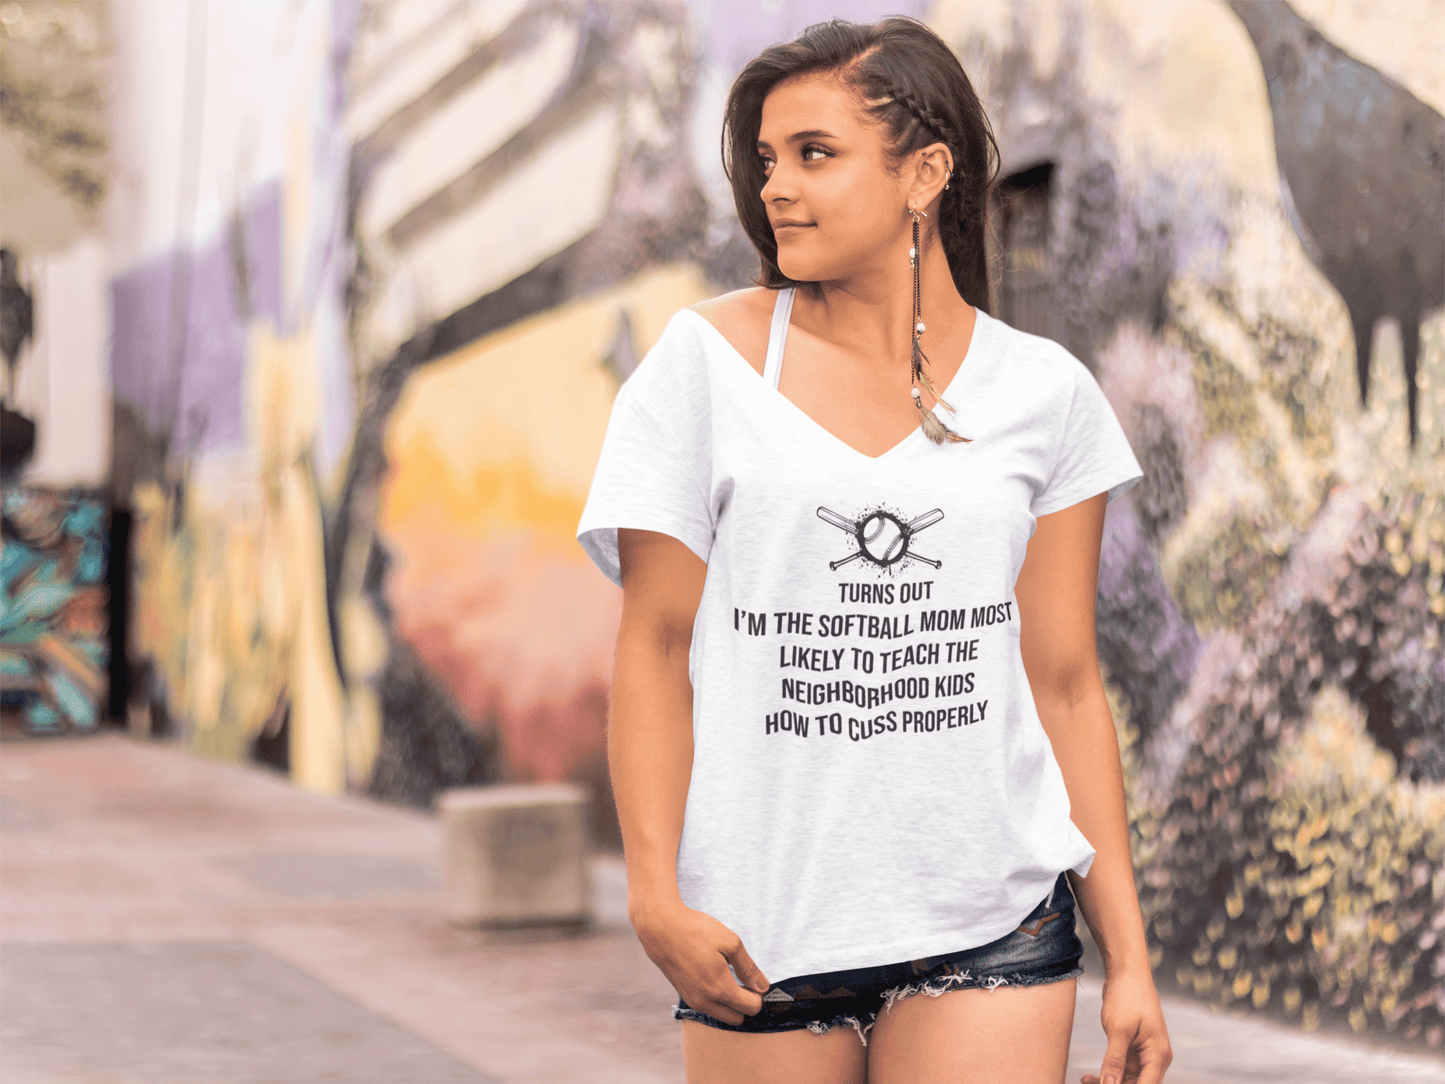 ULTRABASIC Women's V-Neck T-Shirt Turns Out I'm the Softball Mom - Funny Mom's Quote